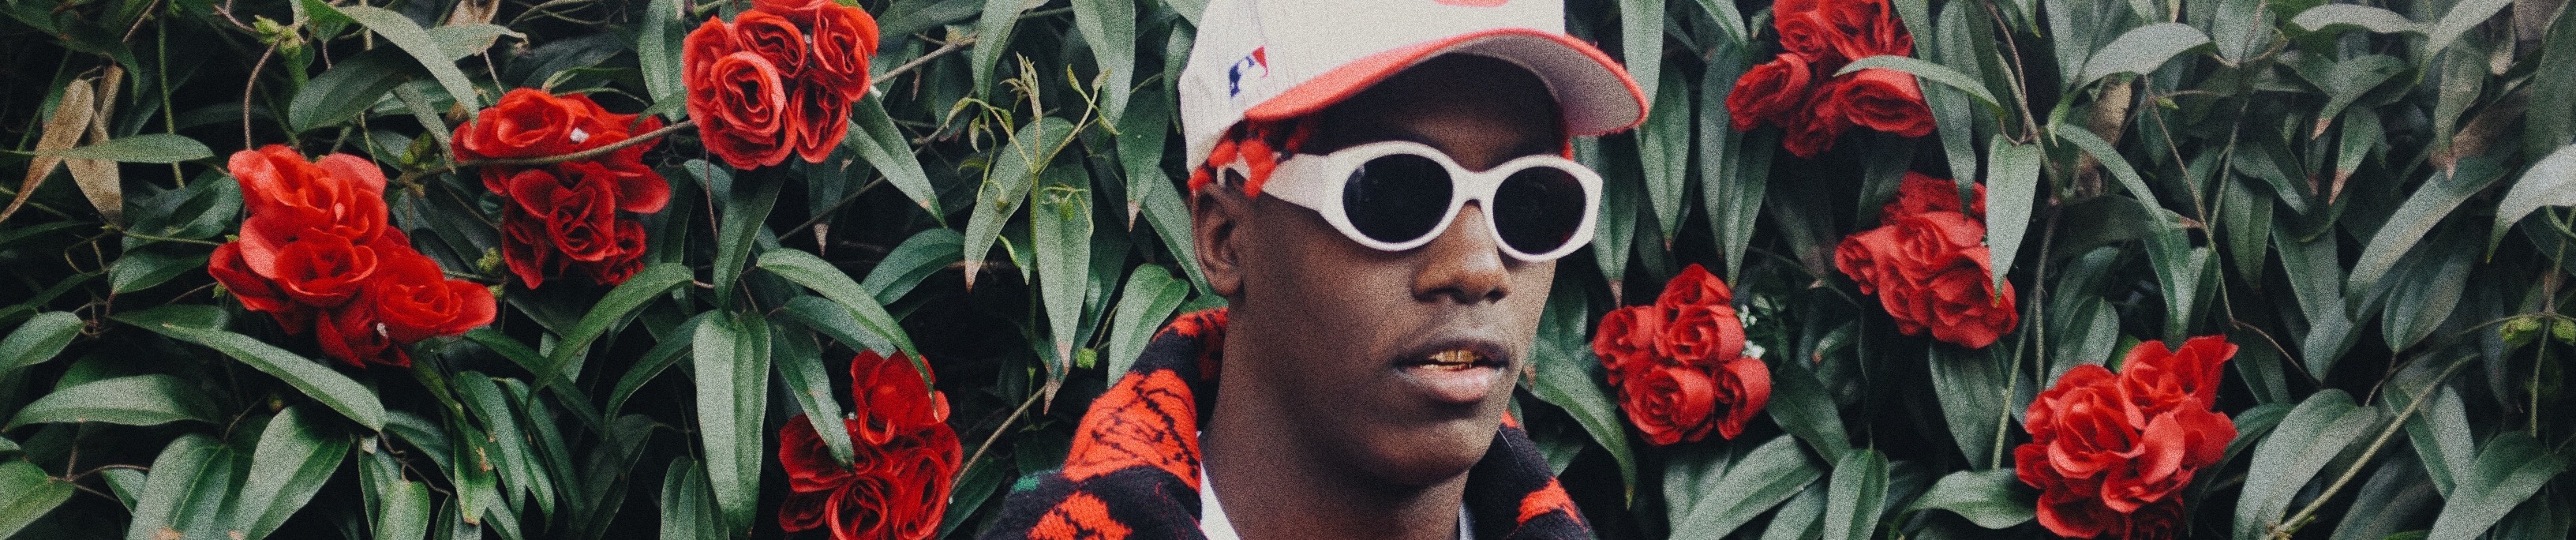 Image Gallery lil yachty 3264x684